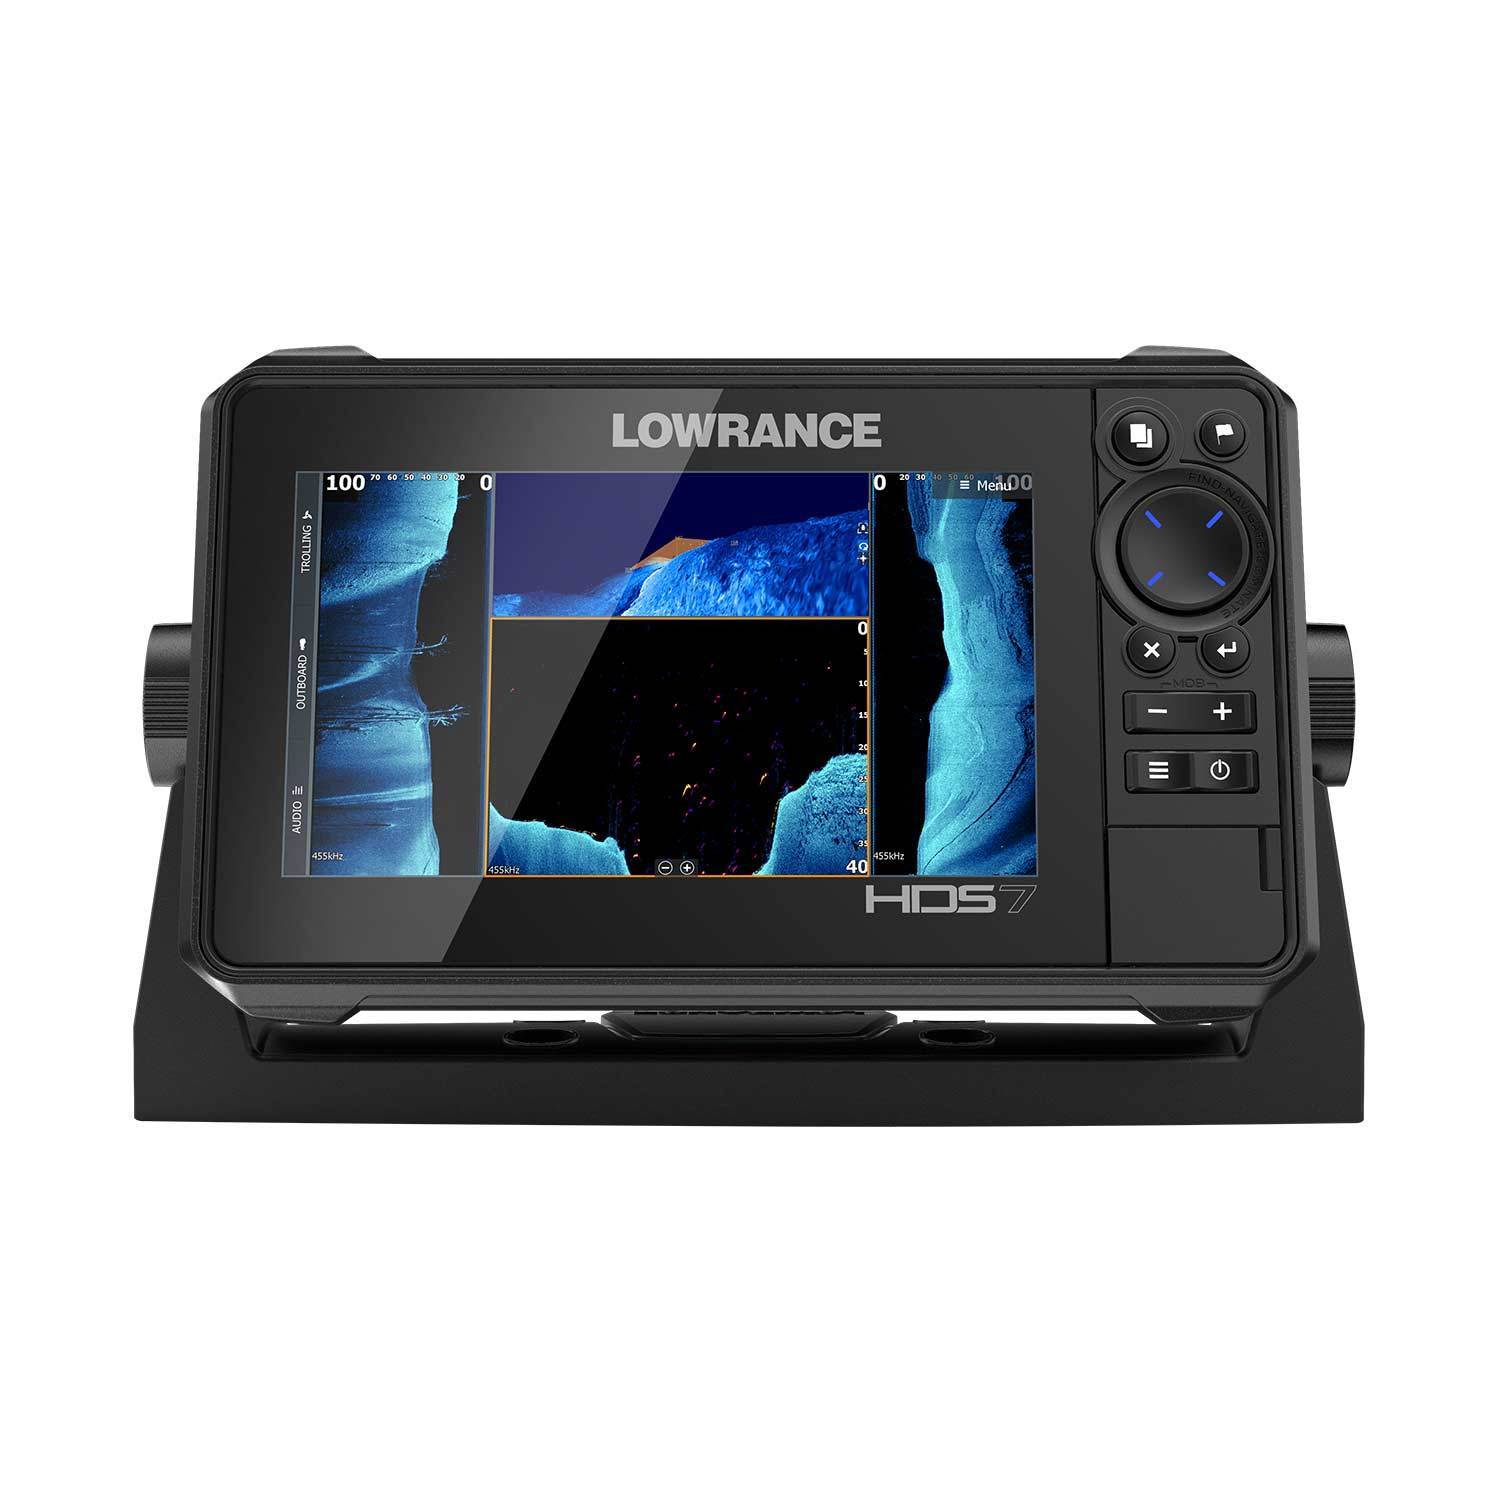 Lowrance HDS-7 Gen2 Base US Fishfinder and GPS Chartplotter with